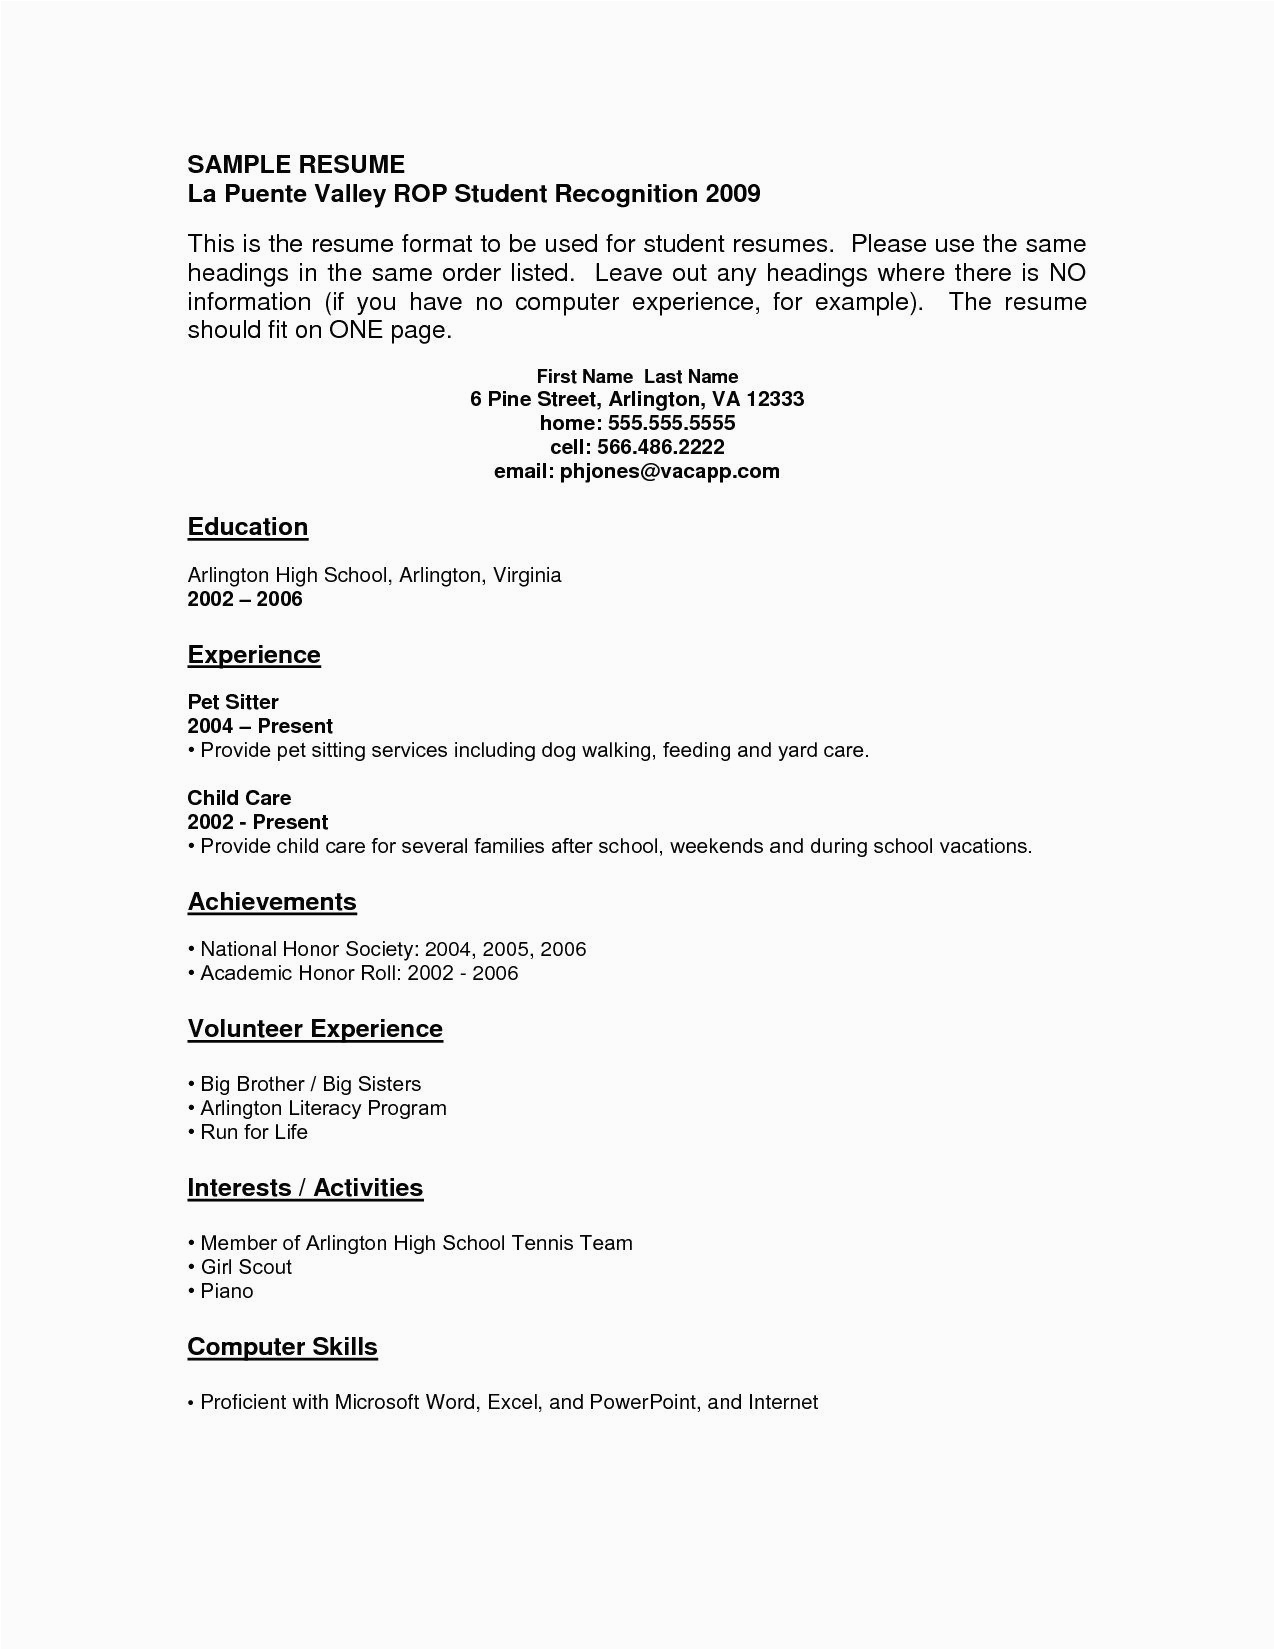 Best Resume Template for No Work Experience Student Sample Resume No Work Experience Best Resume